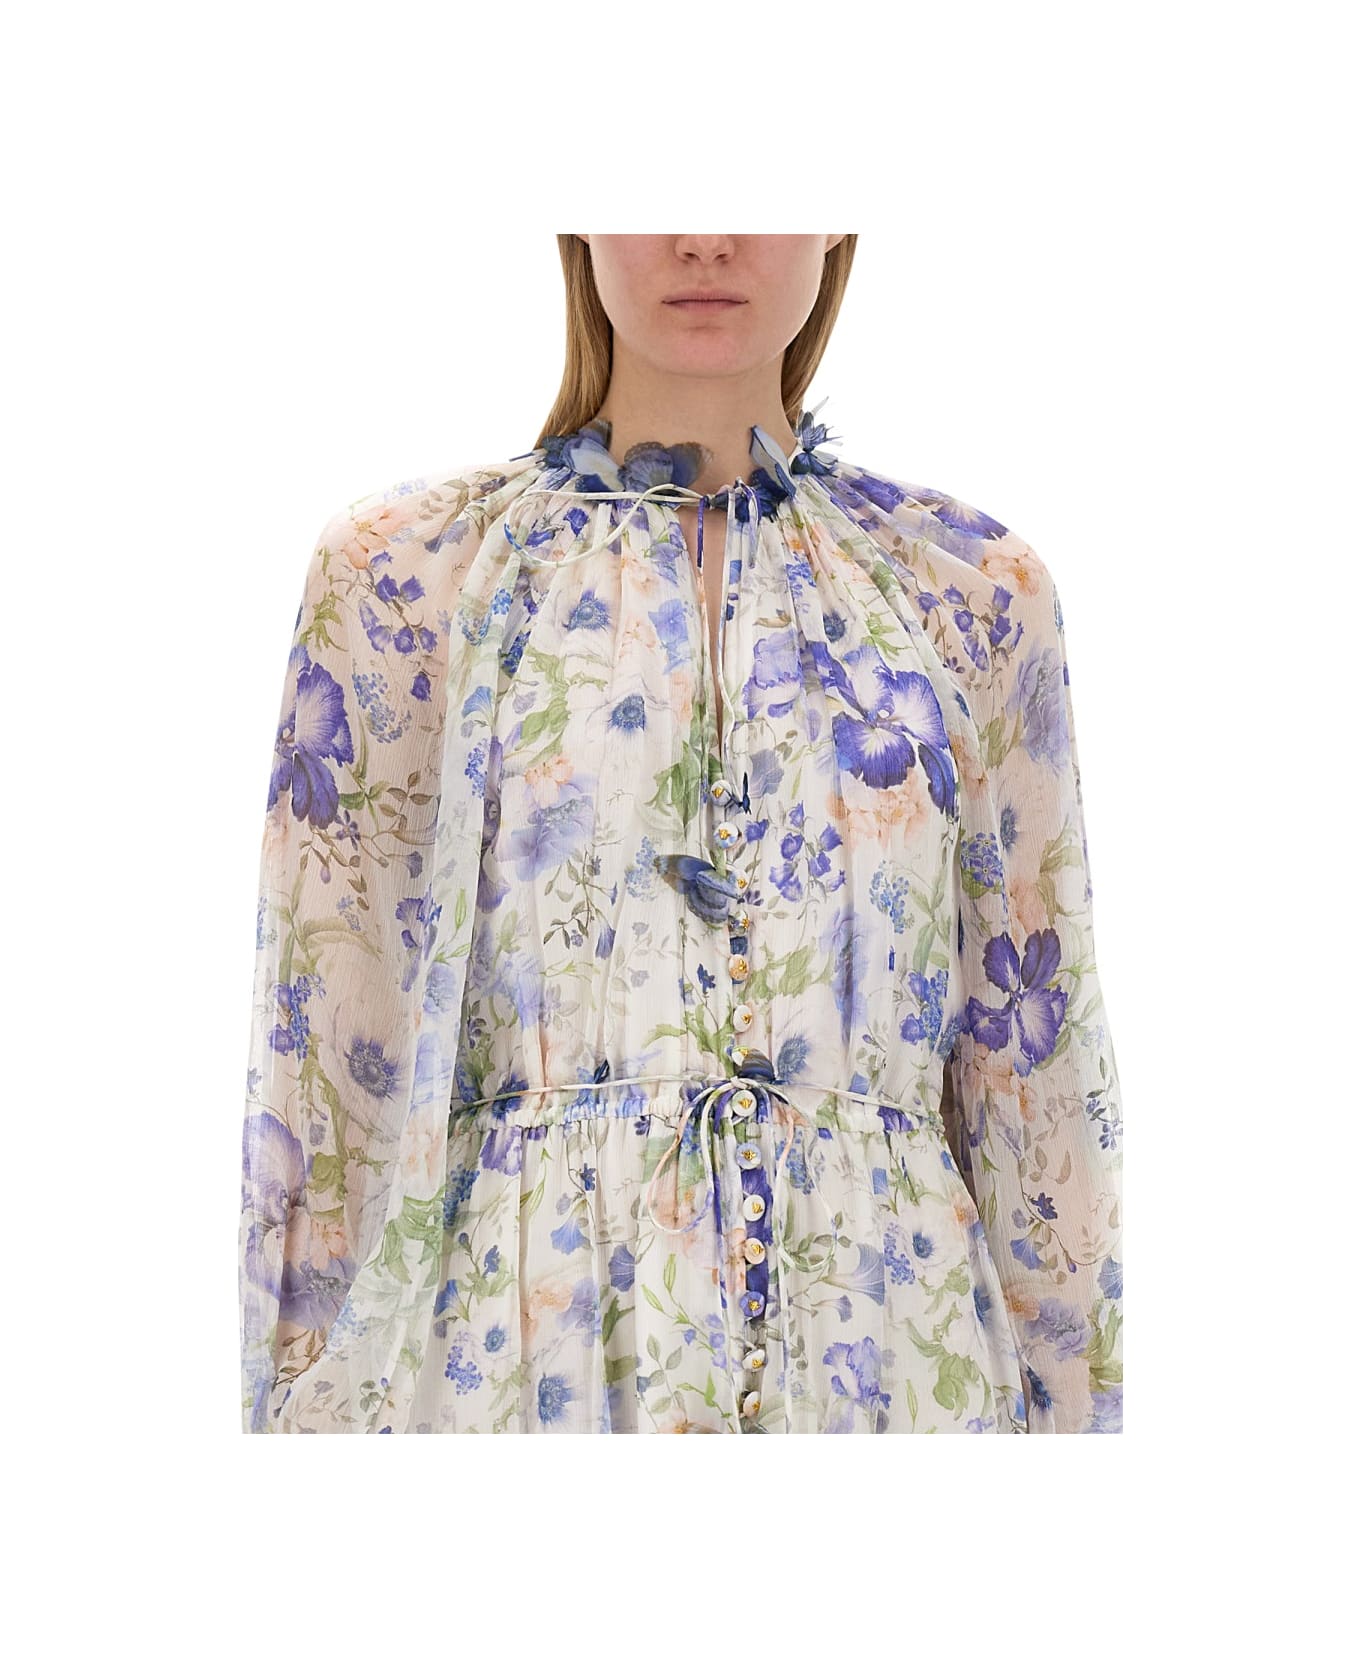 Zimmermann Dress With Floral Pattern - Blue ジャンプスーツ